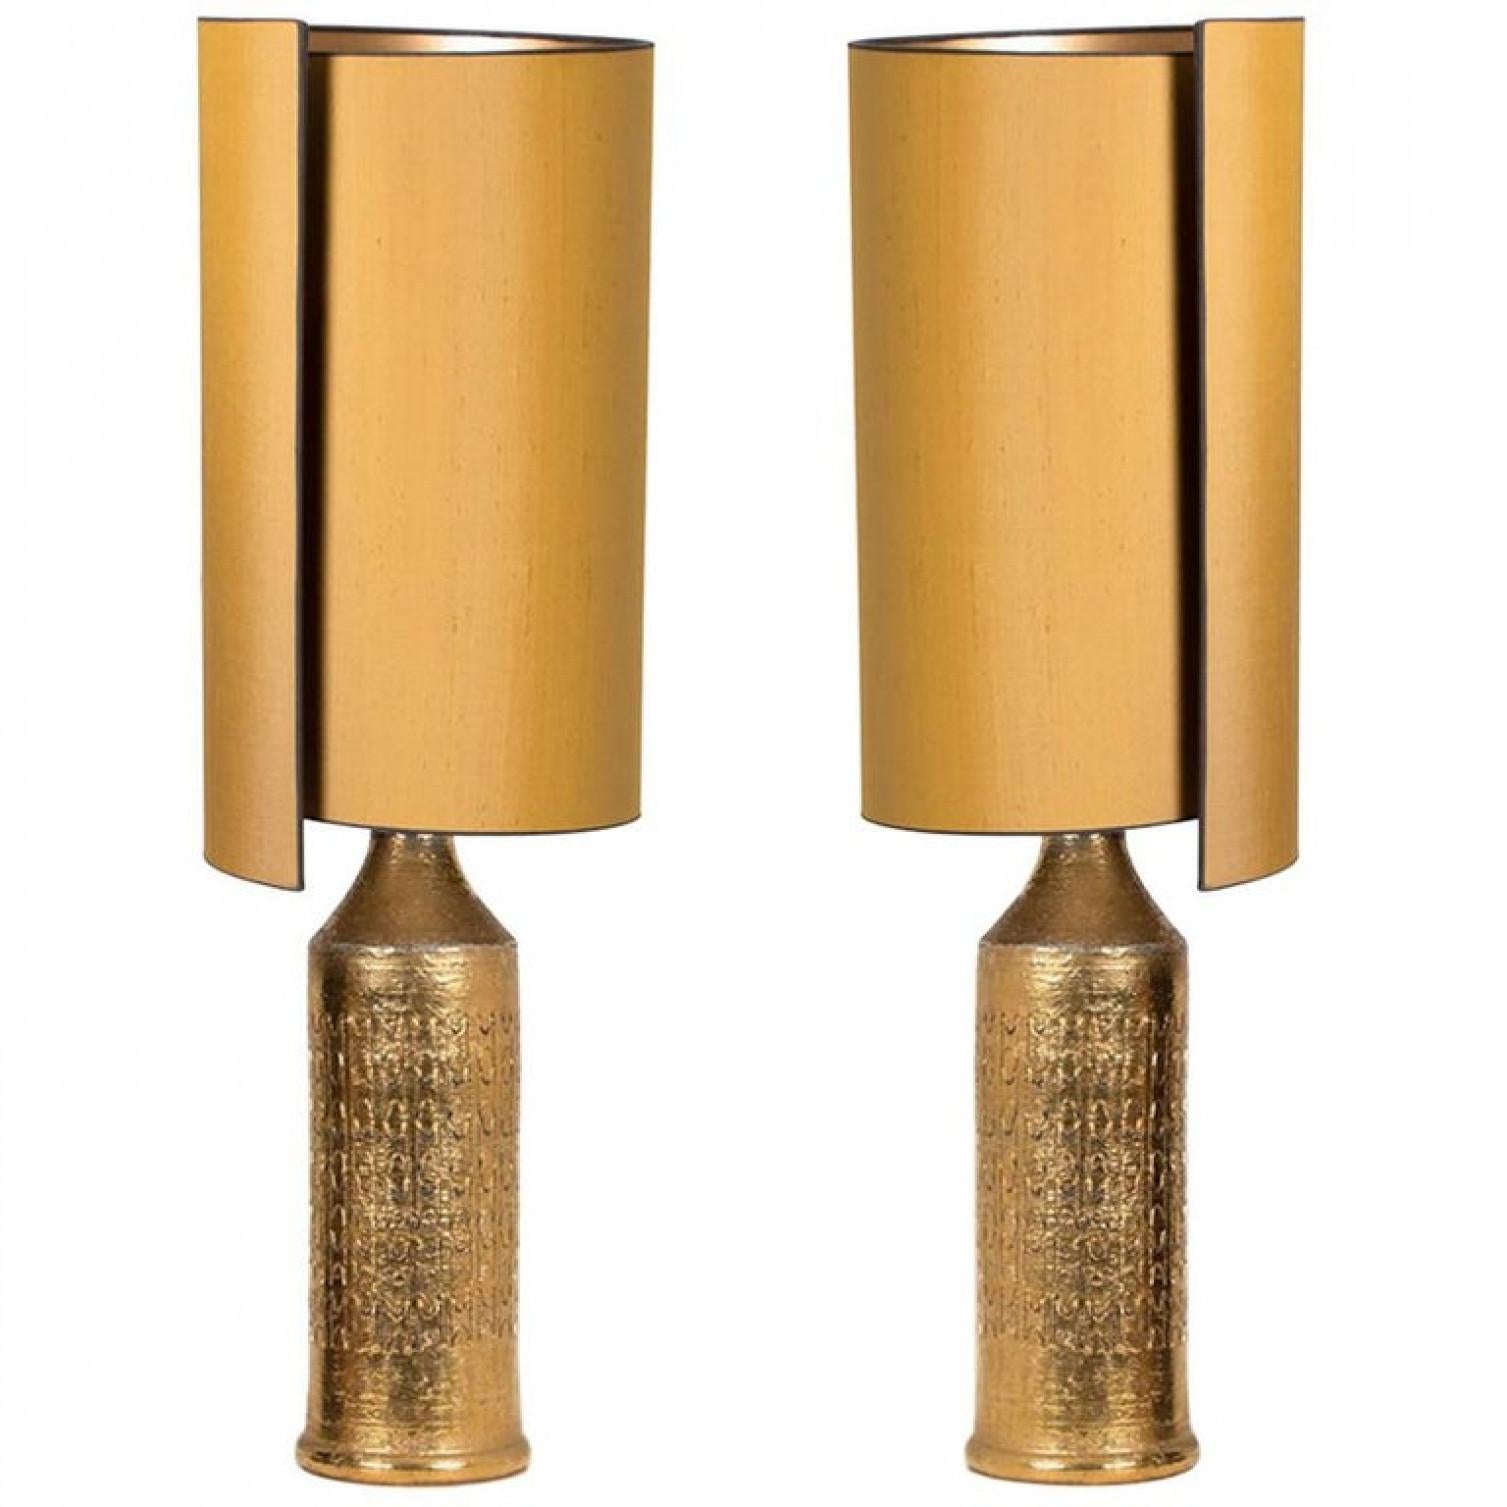 20th Century Pair of Bitossi Lamps for Bergboms, with Custom Made Silk Shades by Rene Houben For Sale